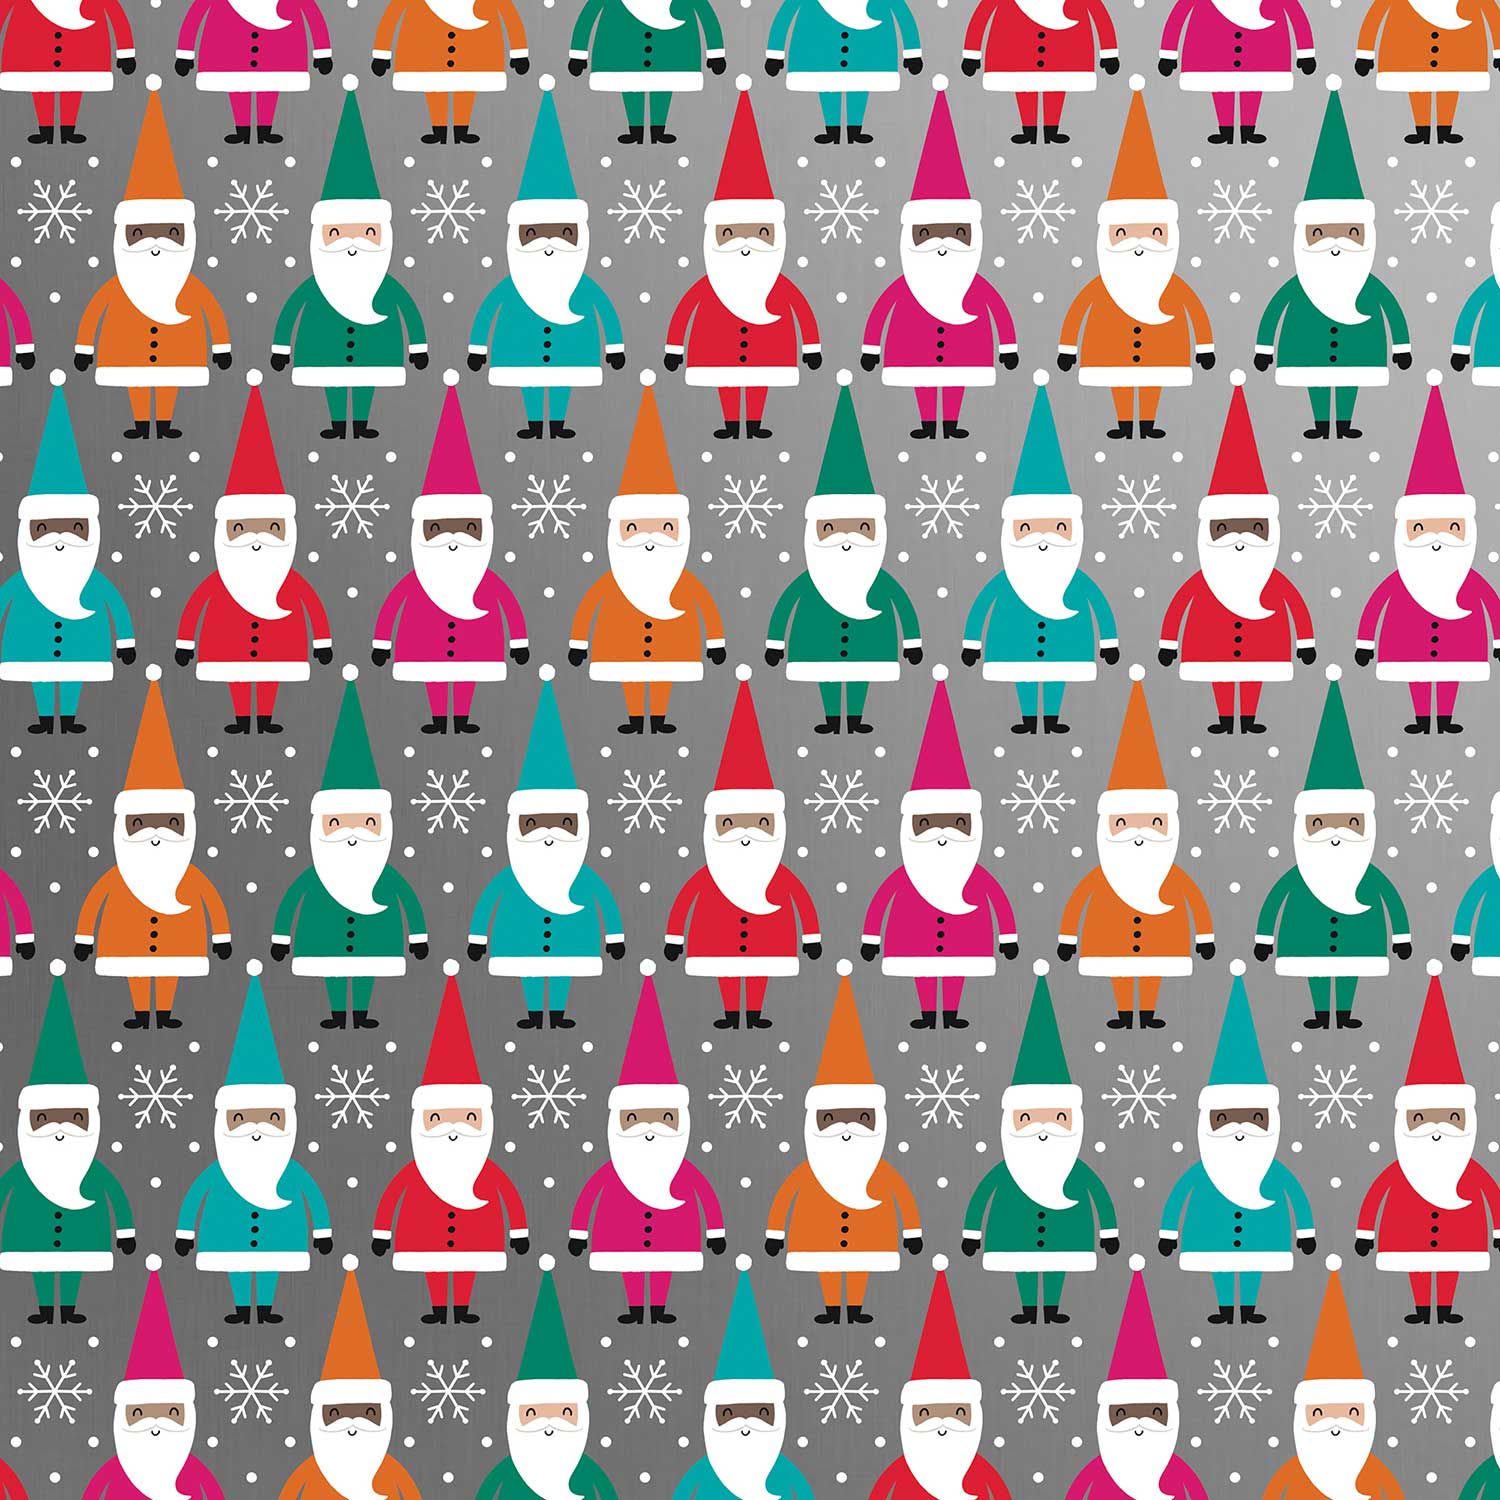 Bright Santa Christmas Gift Wrap 1/4 Ream 208 ft x 24 in